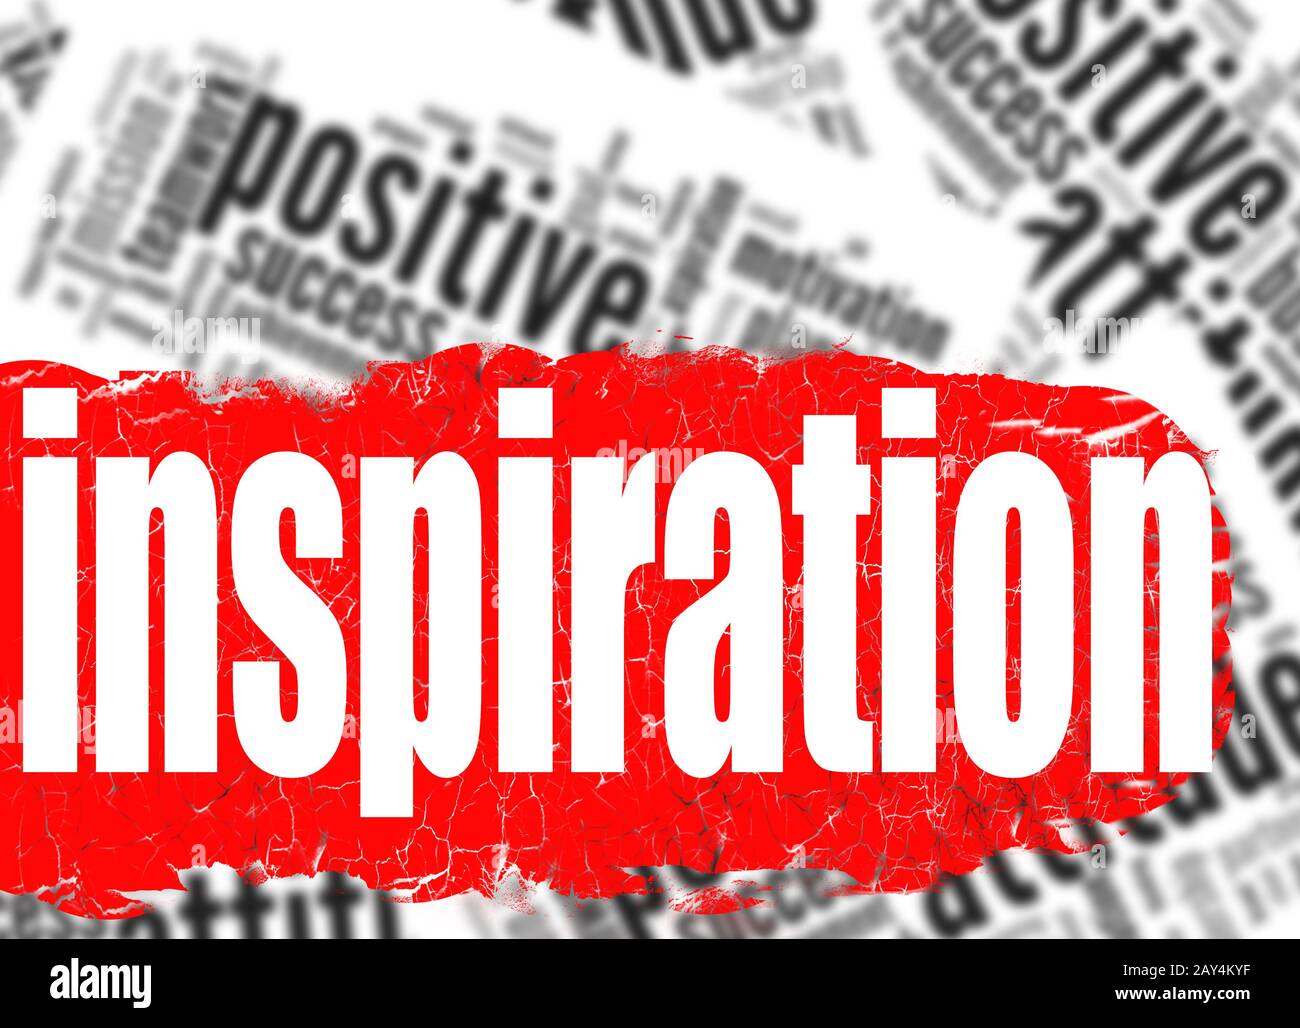 Word cloud inspiration business sucess concept Stock Photo